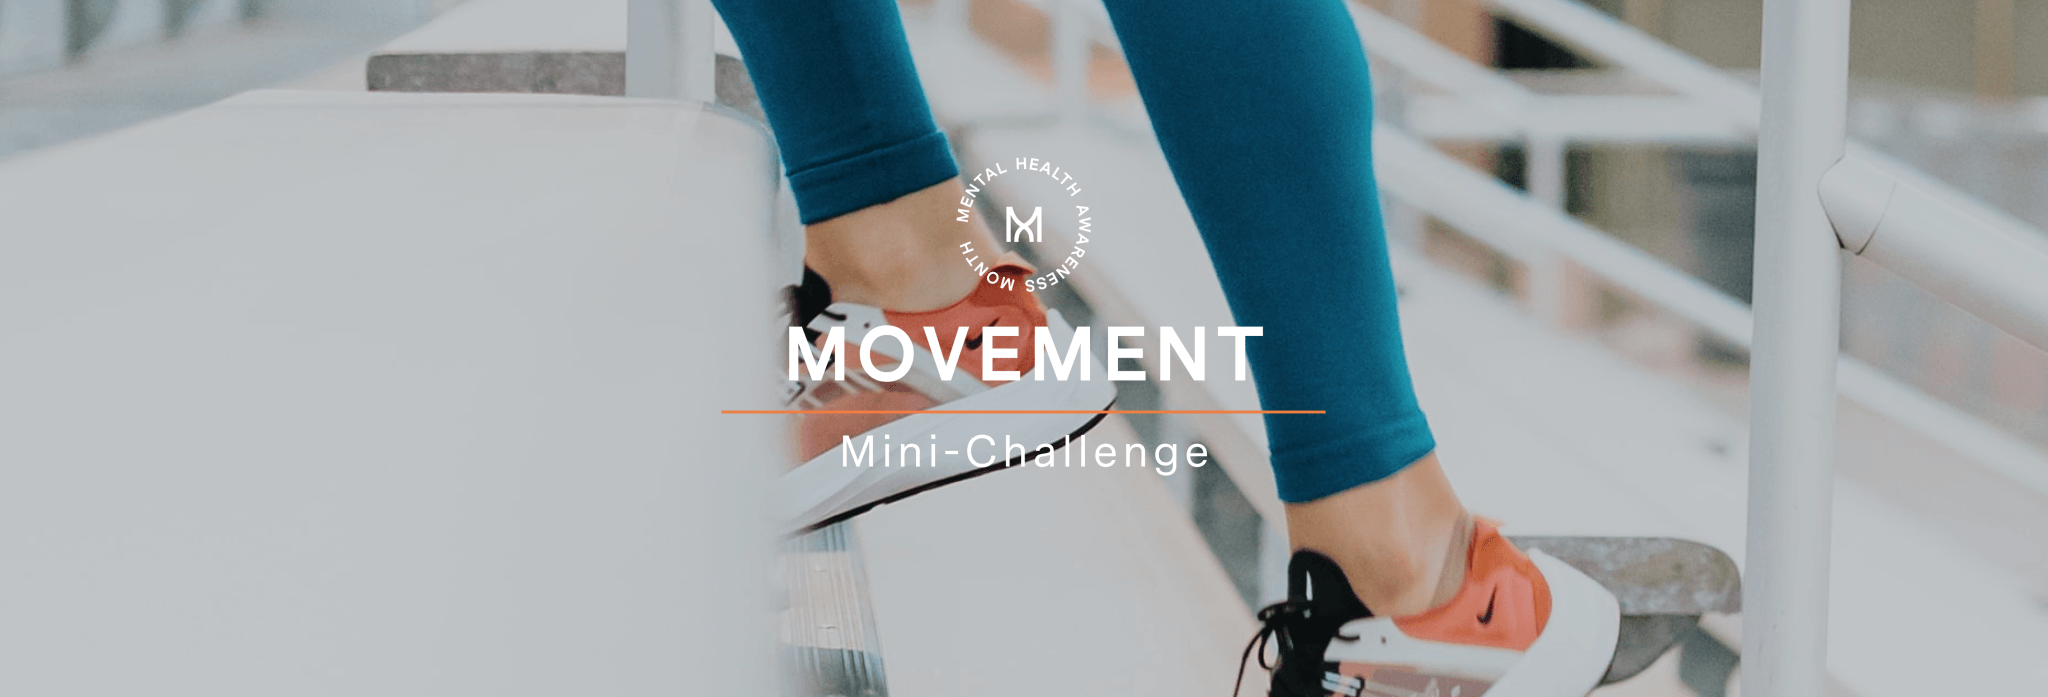 Movement Mini-Challenge: Week 2 of Madefor's Mental Health Month | Madefor